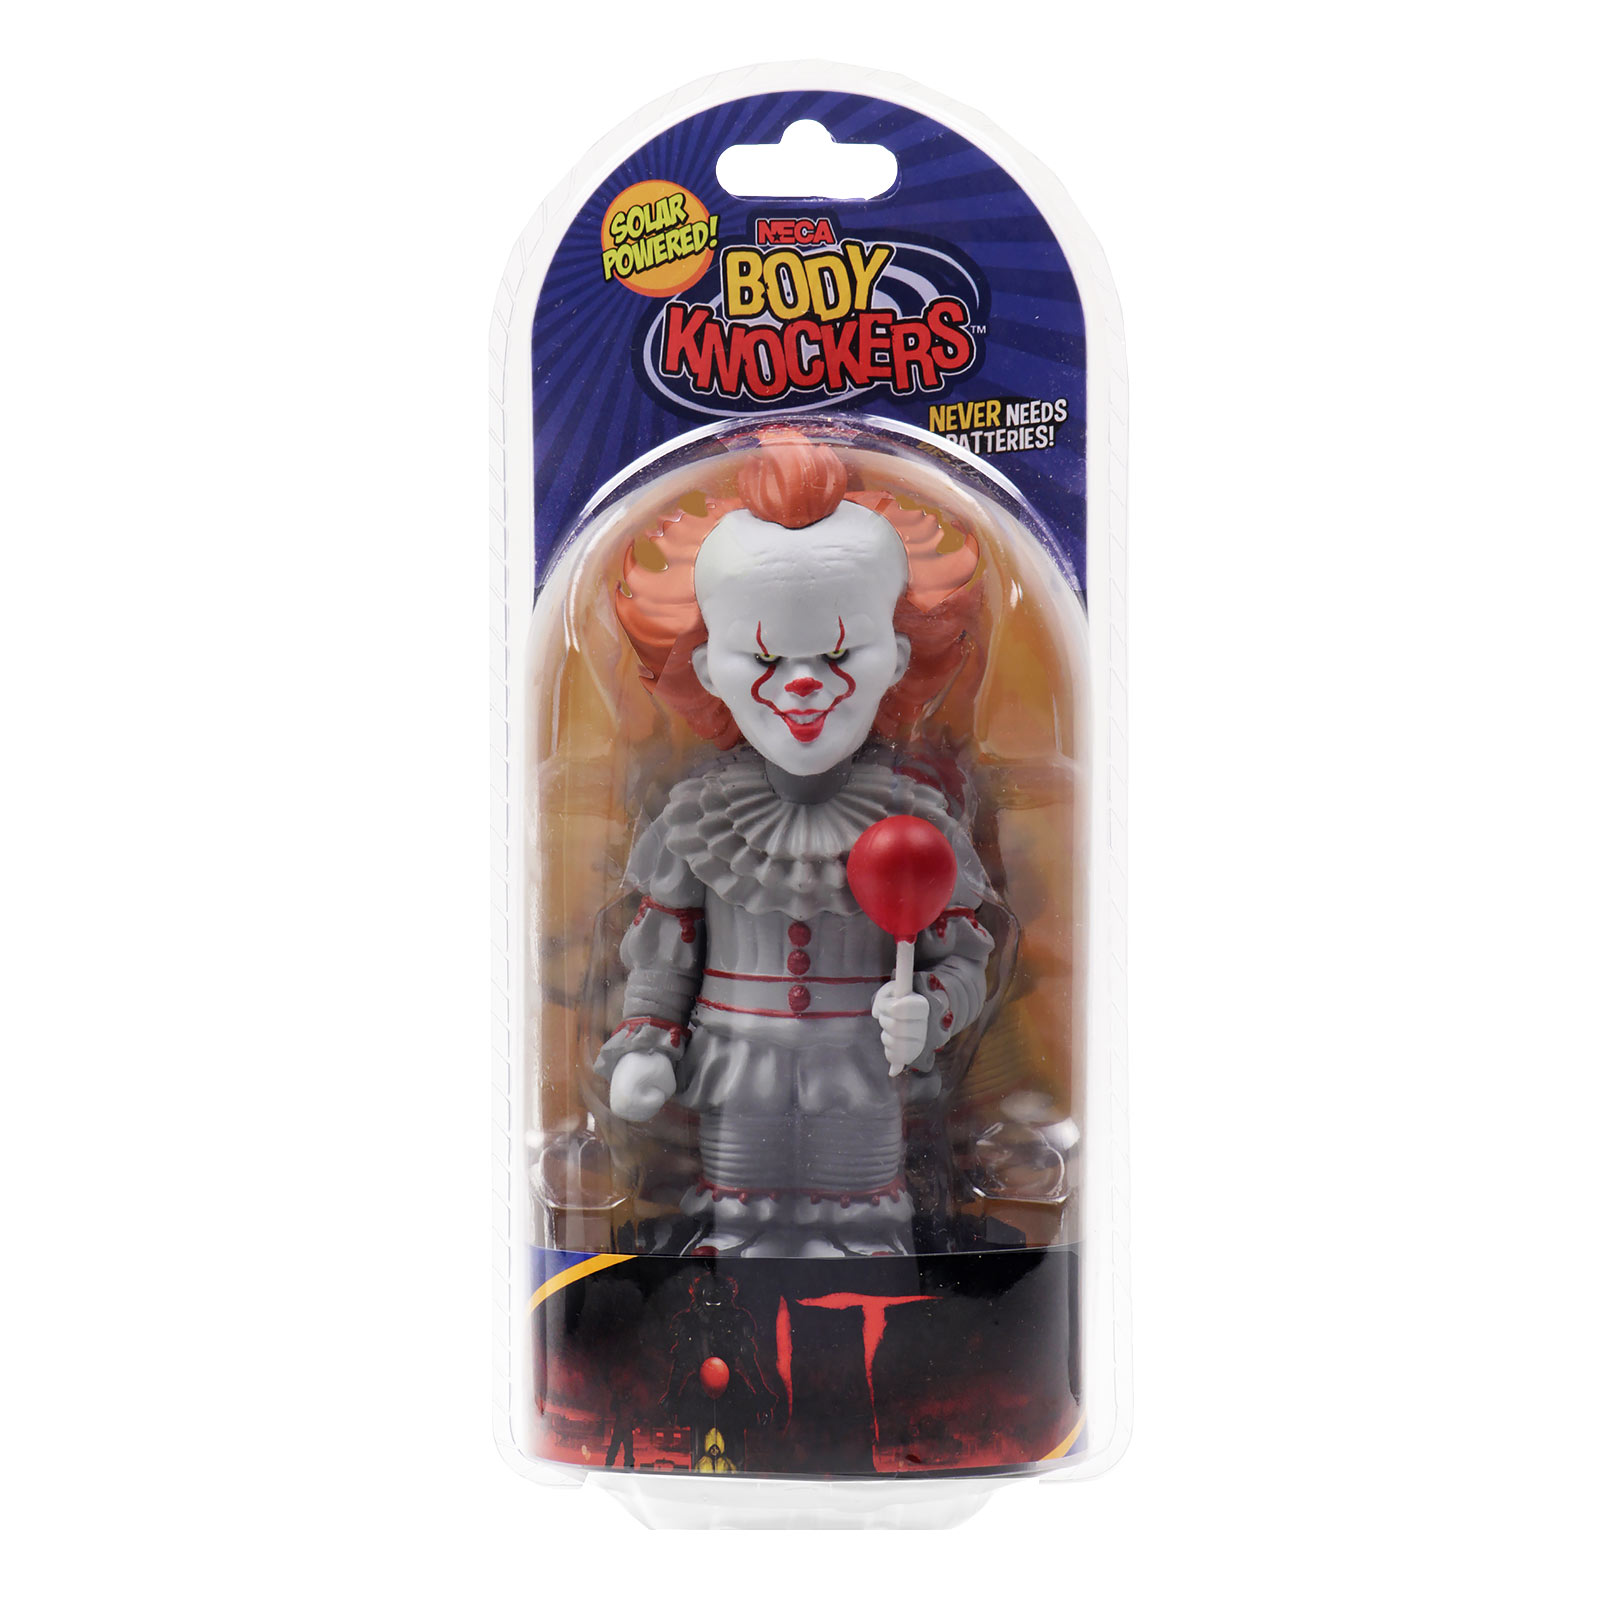 Stephen King's IT - Pennywise Body Knockers Zonnebobblehead